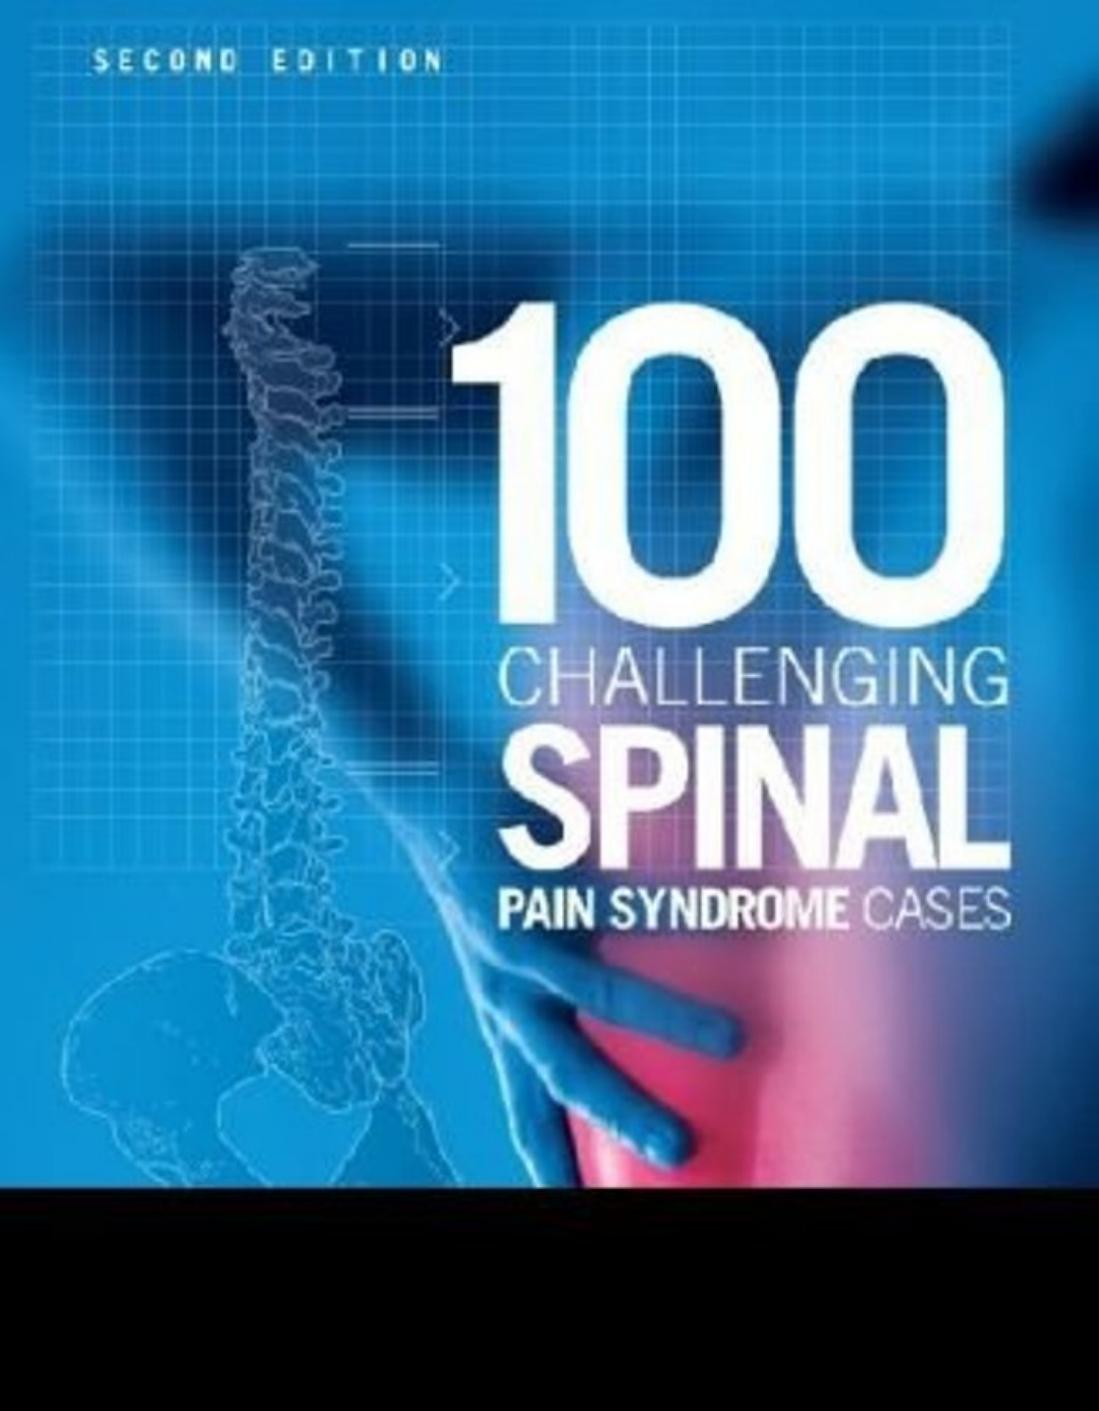 100 Challenging Spinal Pain Syndrome Cases,2nd Edition.jpg